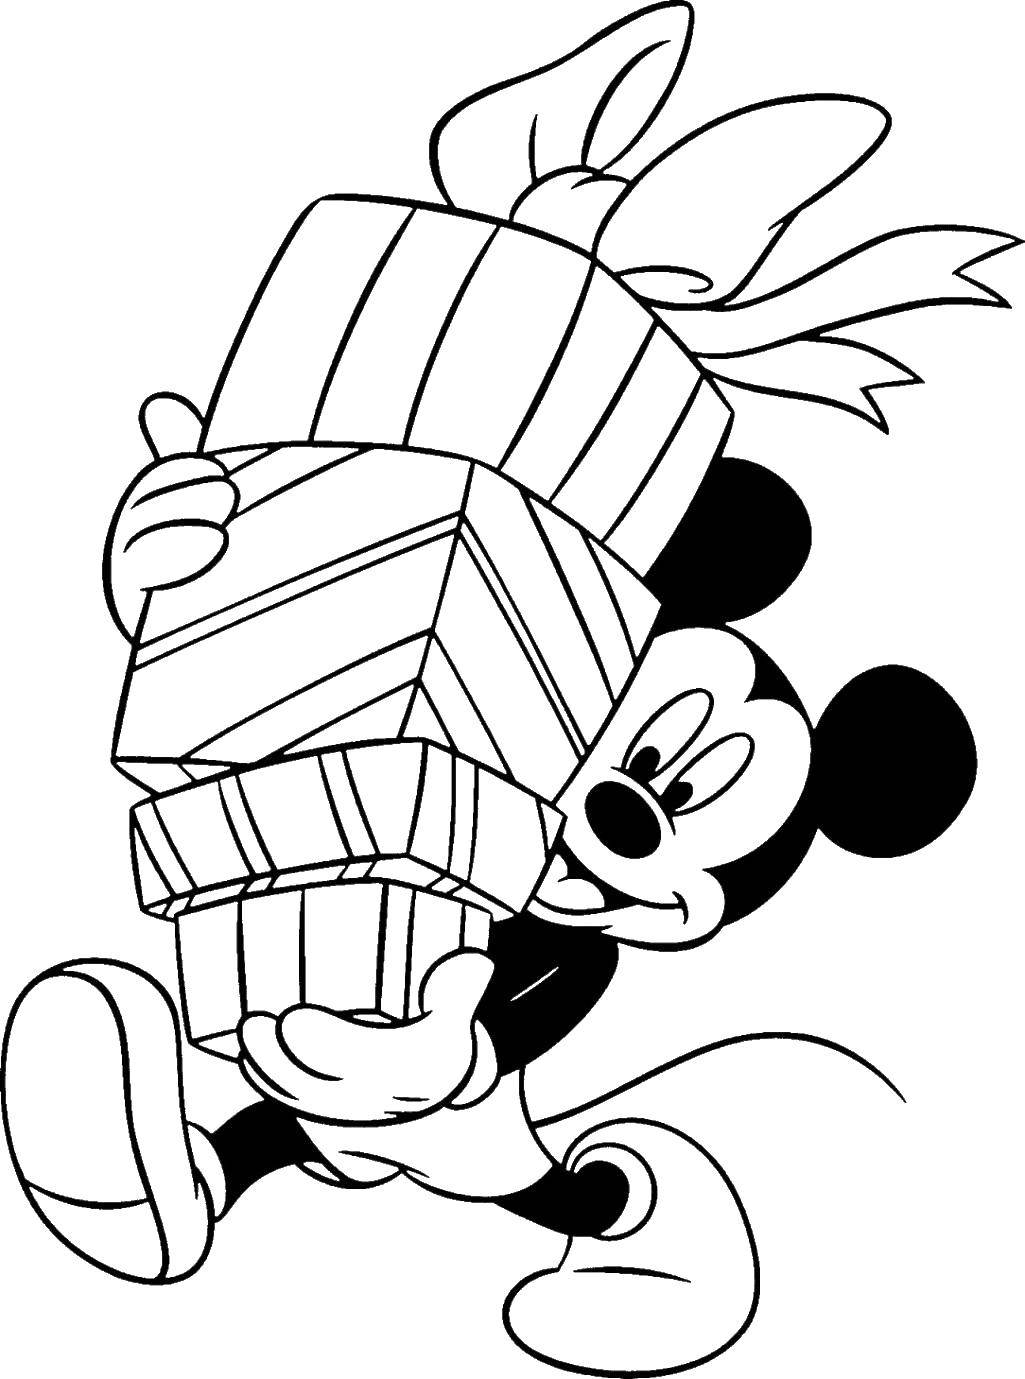 Coloring Mickey mouse with gifts. Category Disney cartoons. Tags:  Mickey, gifts, boxes.